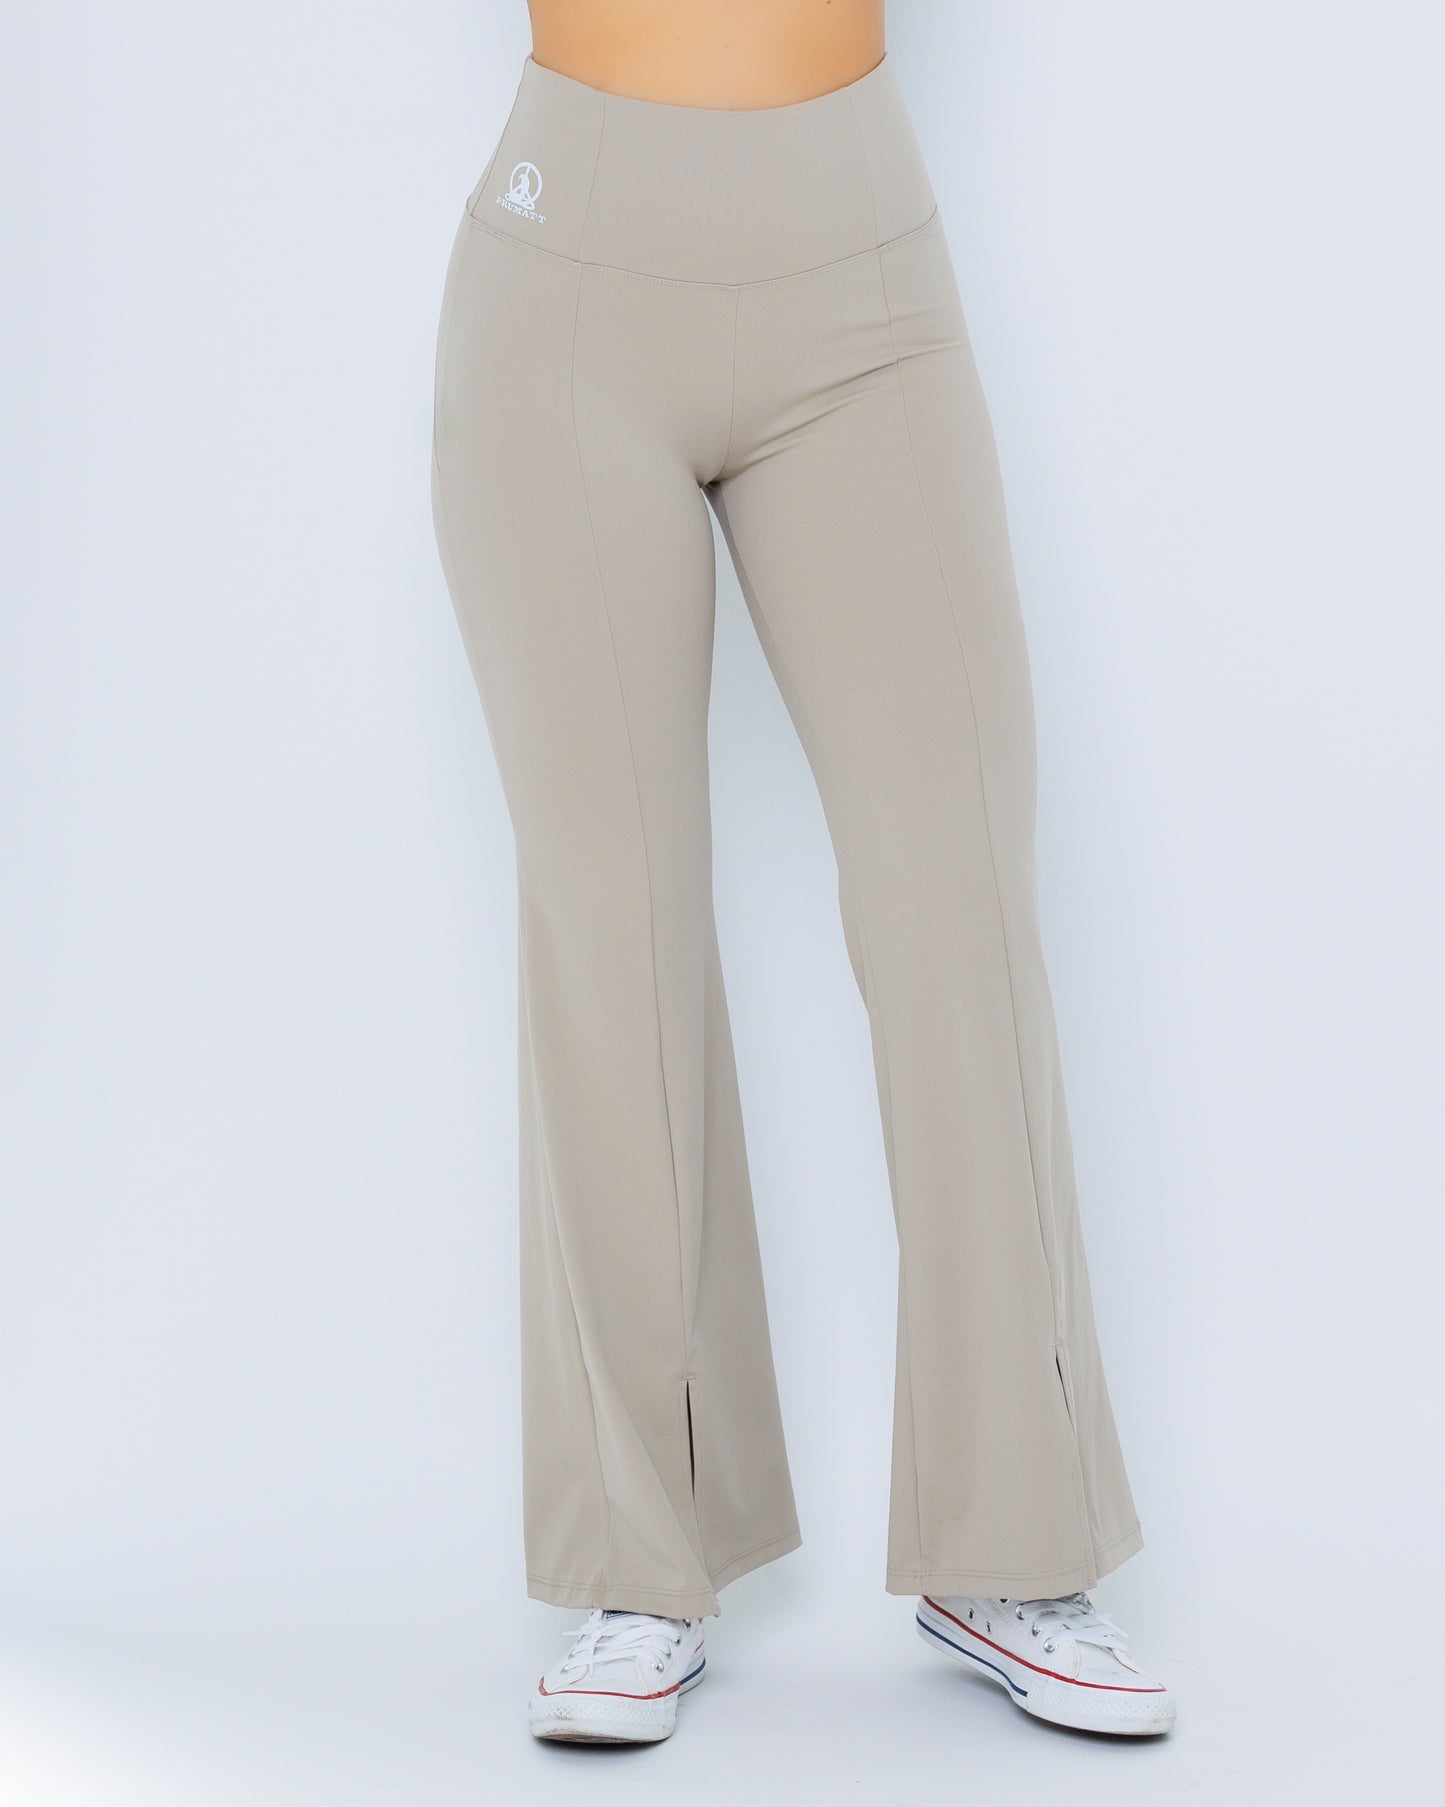 PEACE - Flared Trousers- CAMEL BROWN